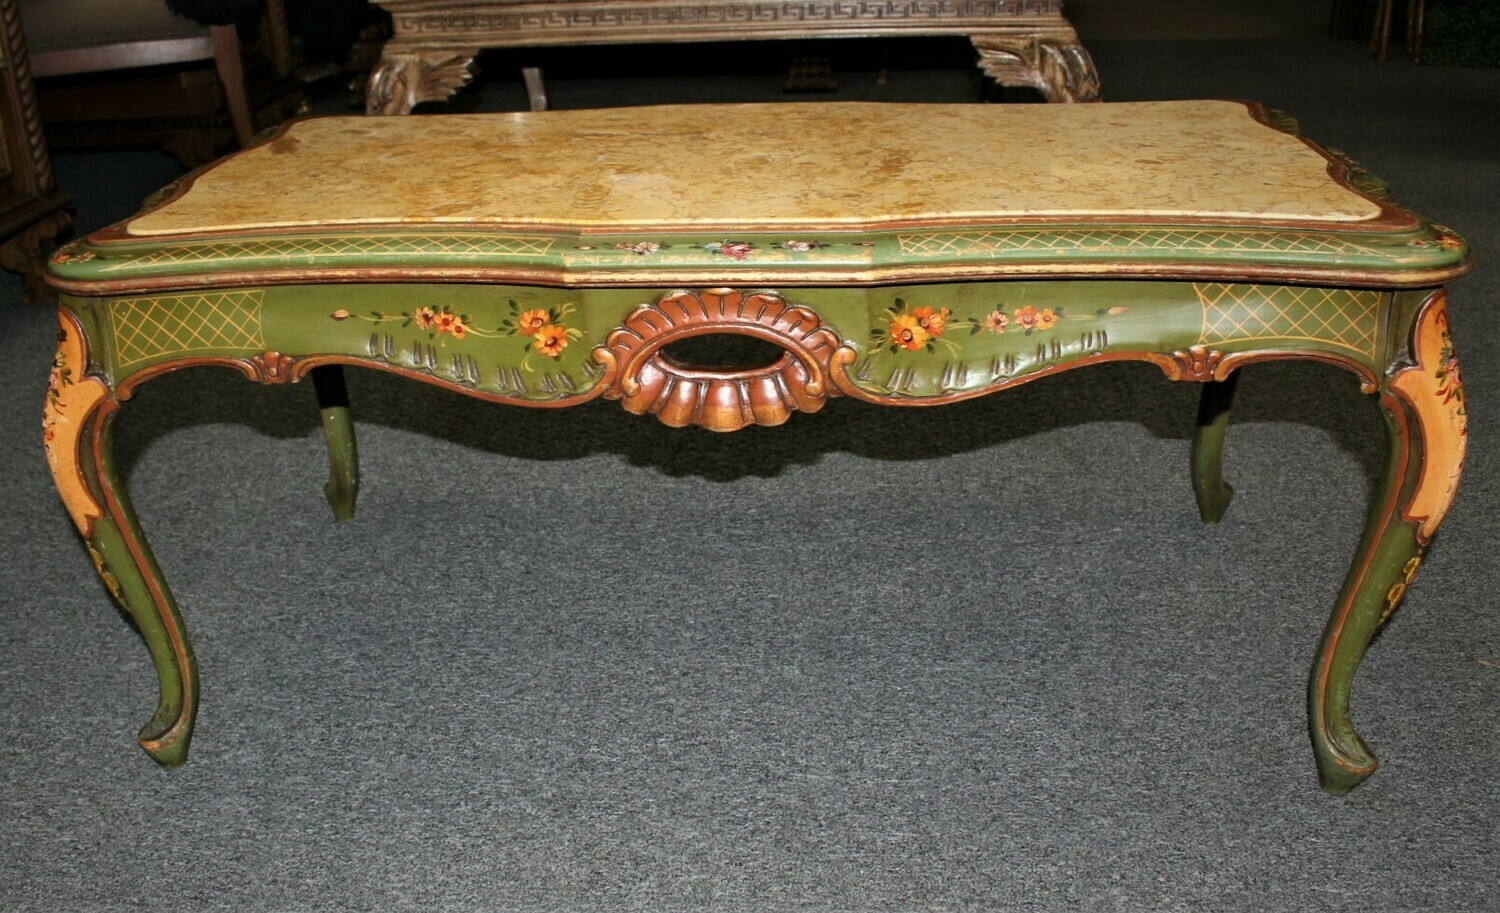 Vintage Shabby Italian Chic Hand Painted Green Floral Marble Top Coffee Table